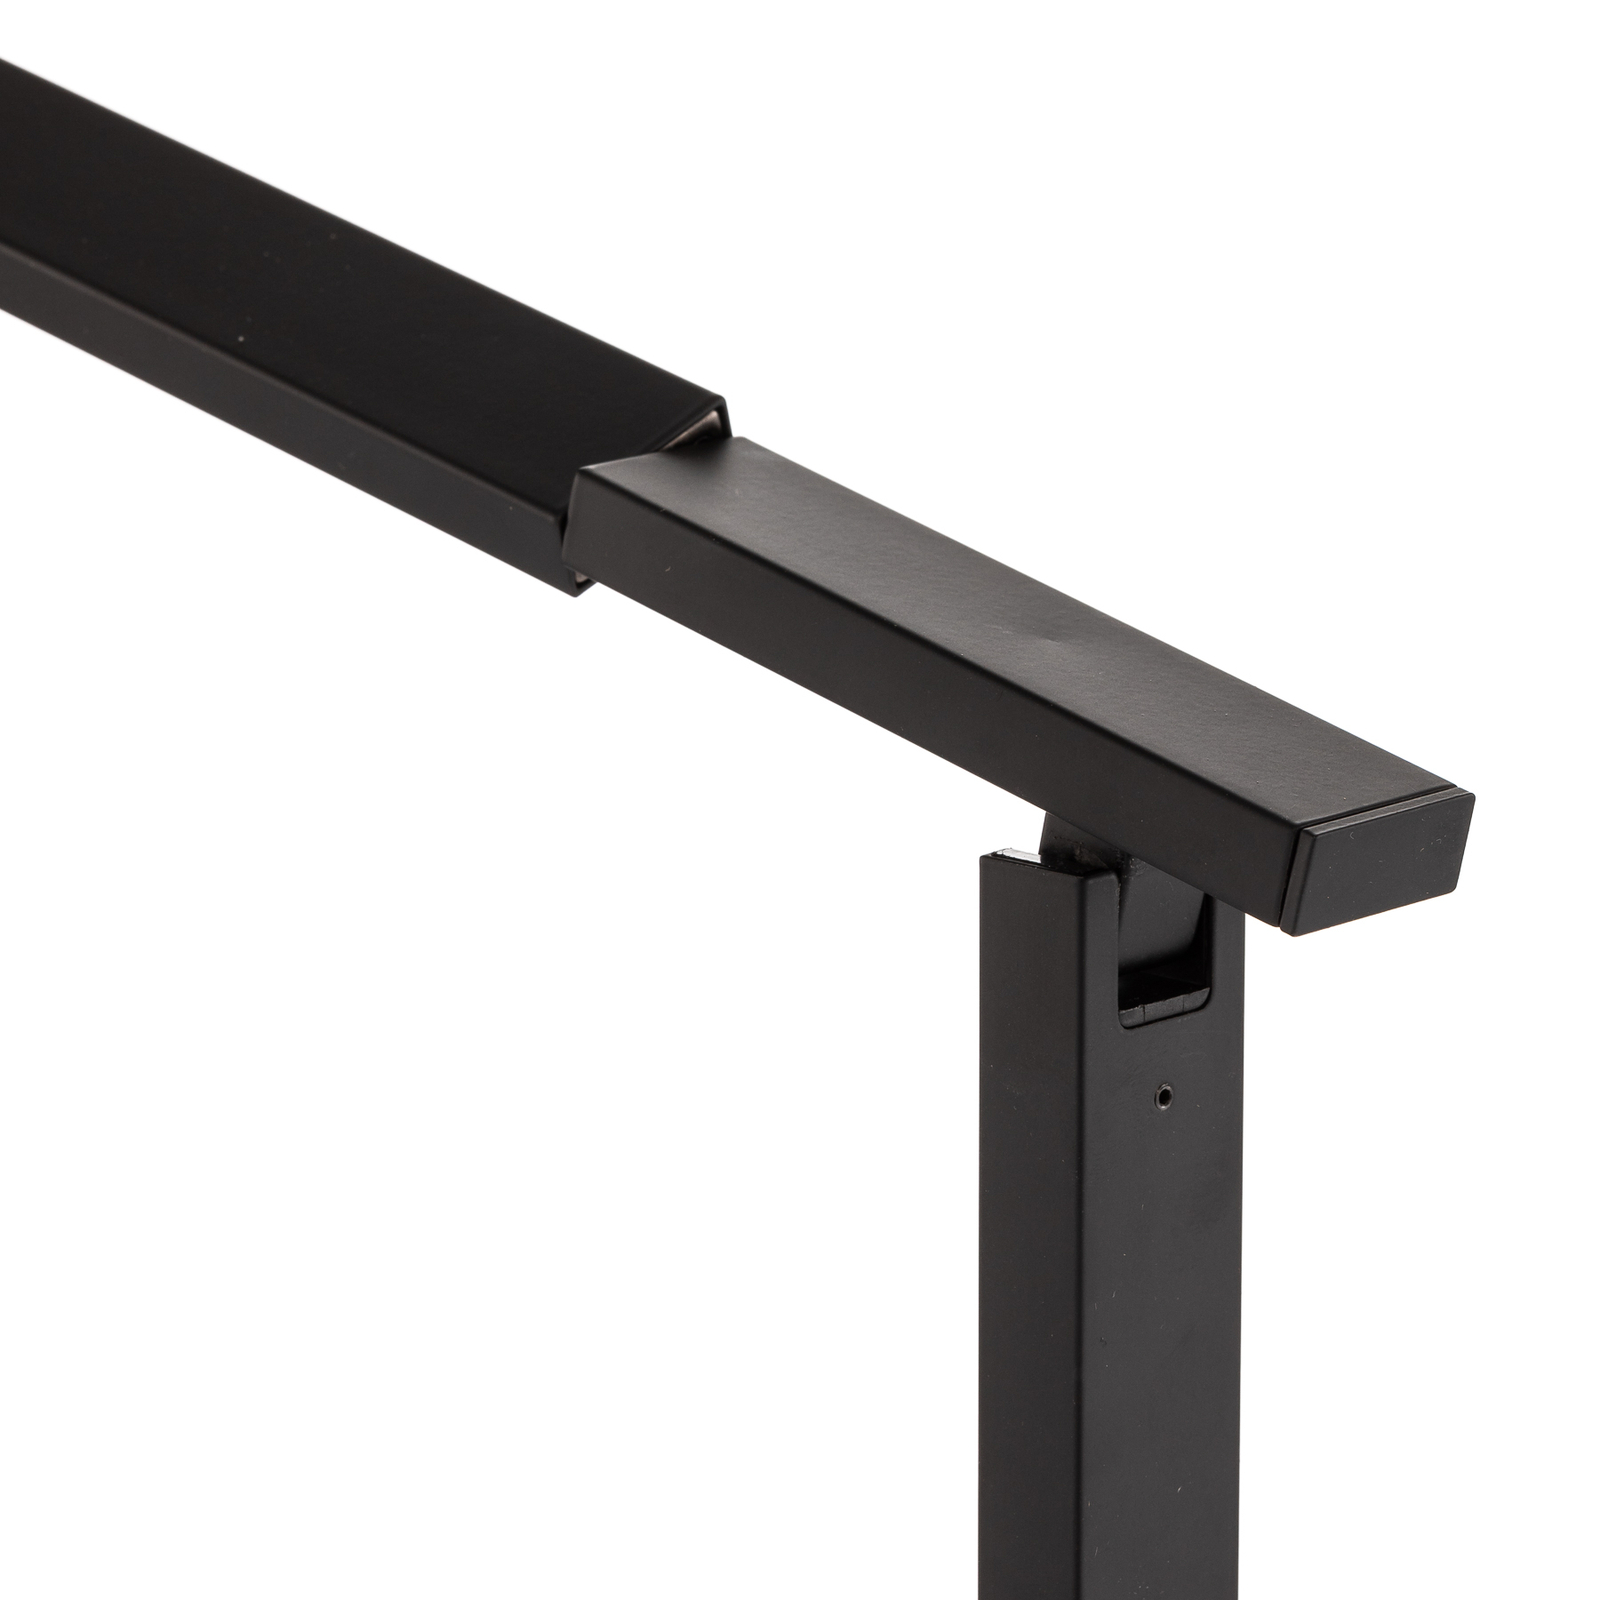 Ideal LED desk lamp with a dimmer, black